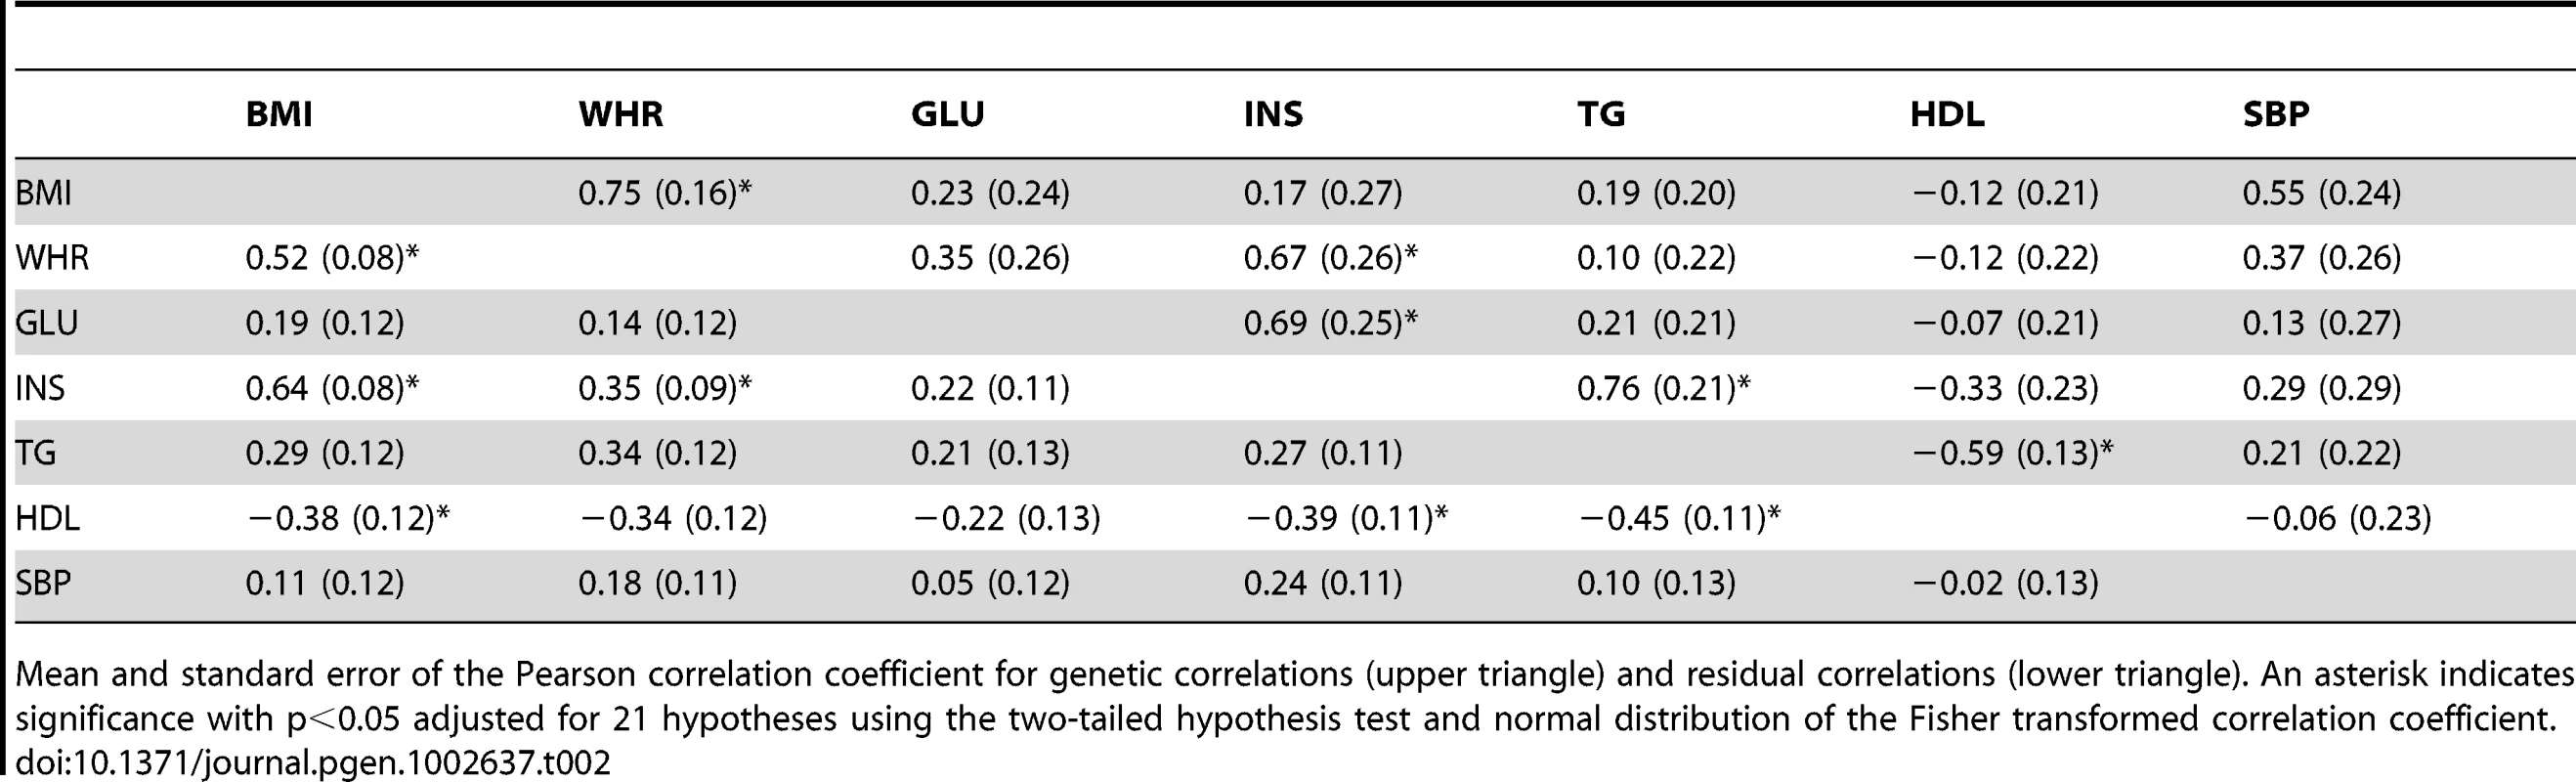 Genetic and residual correlation coefficients between MetS traits in the ARIC population among related individuals from the bivariate REML model.